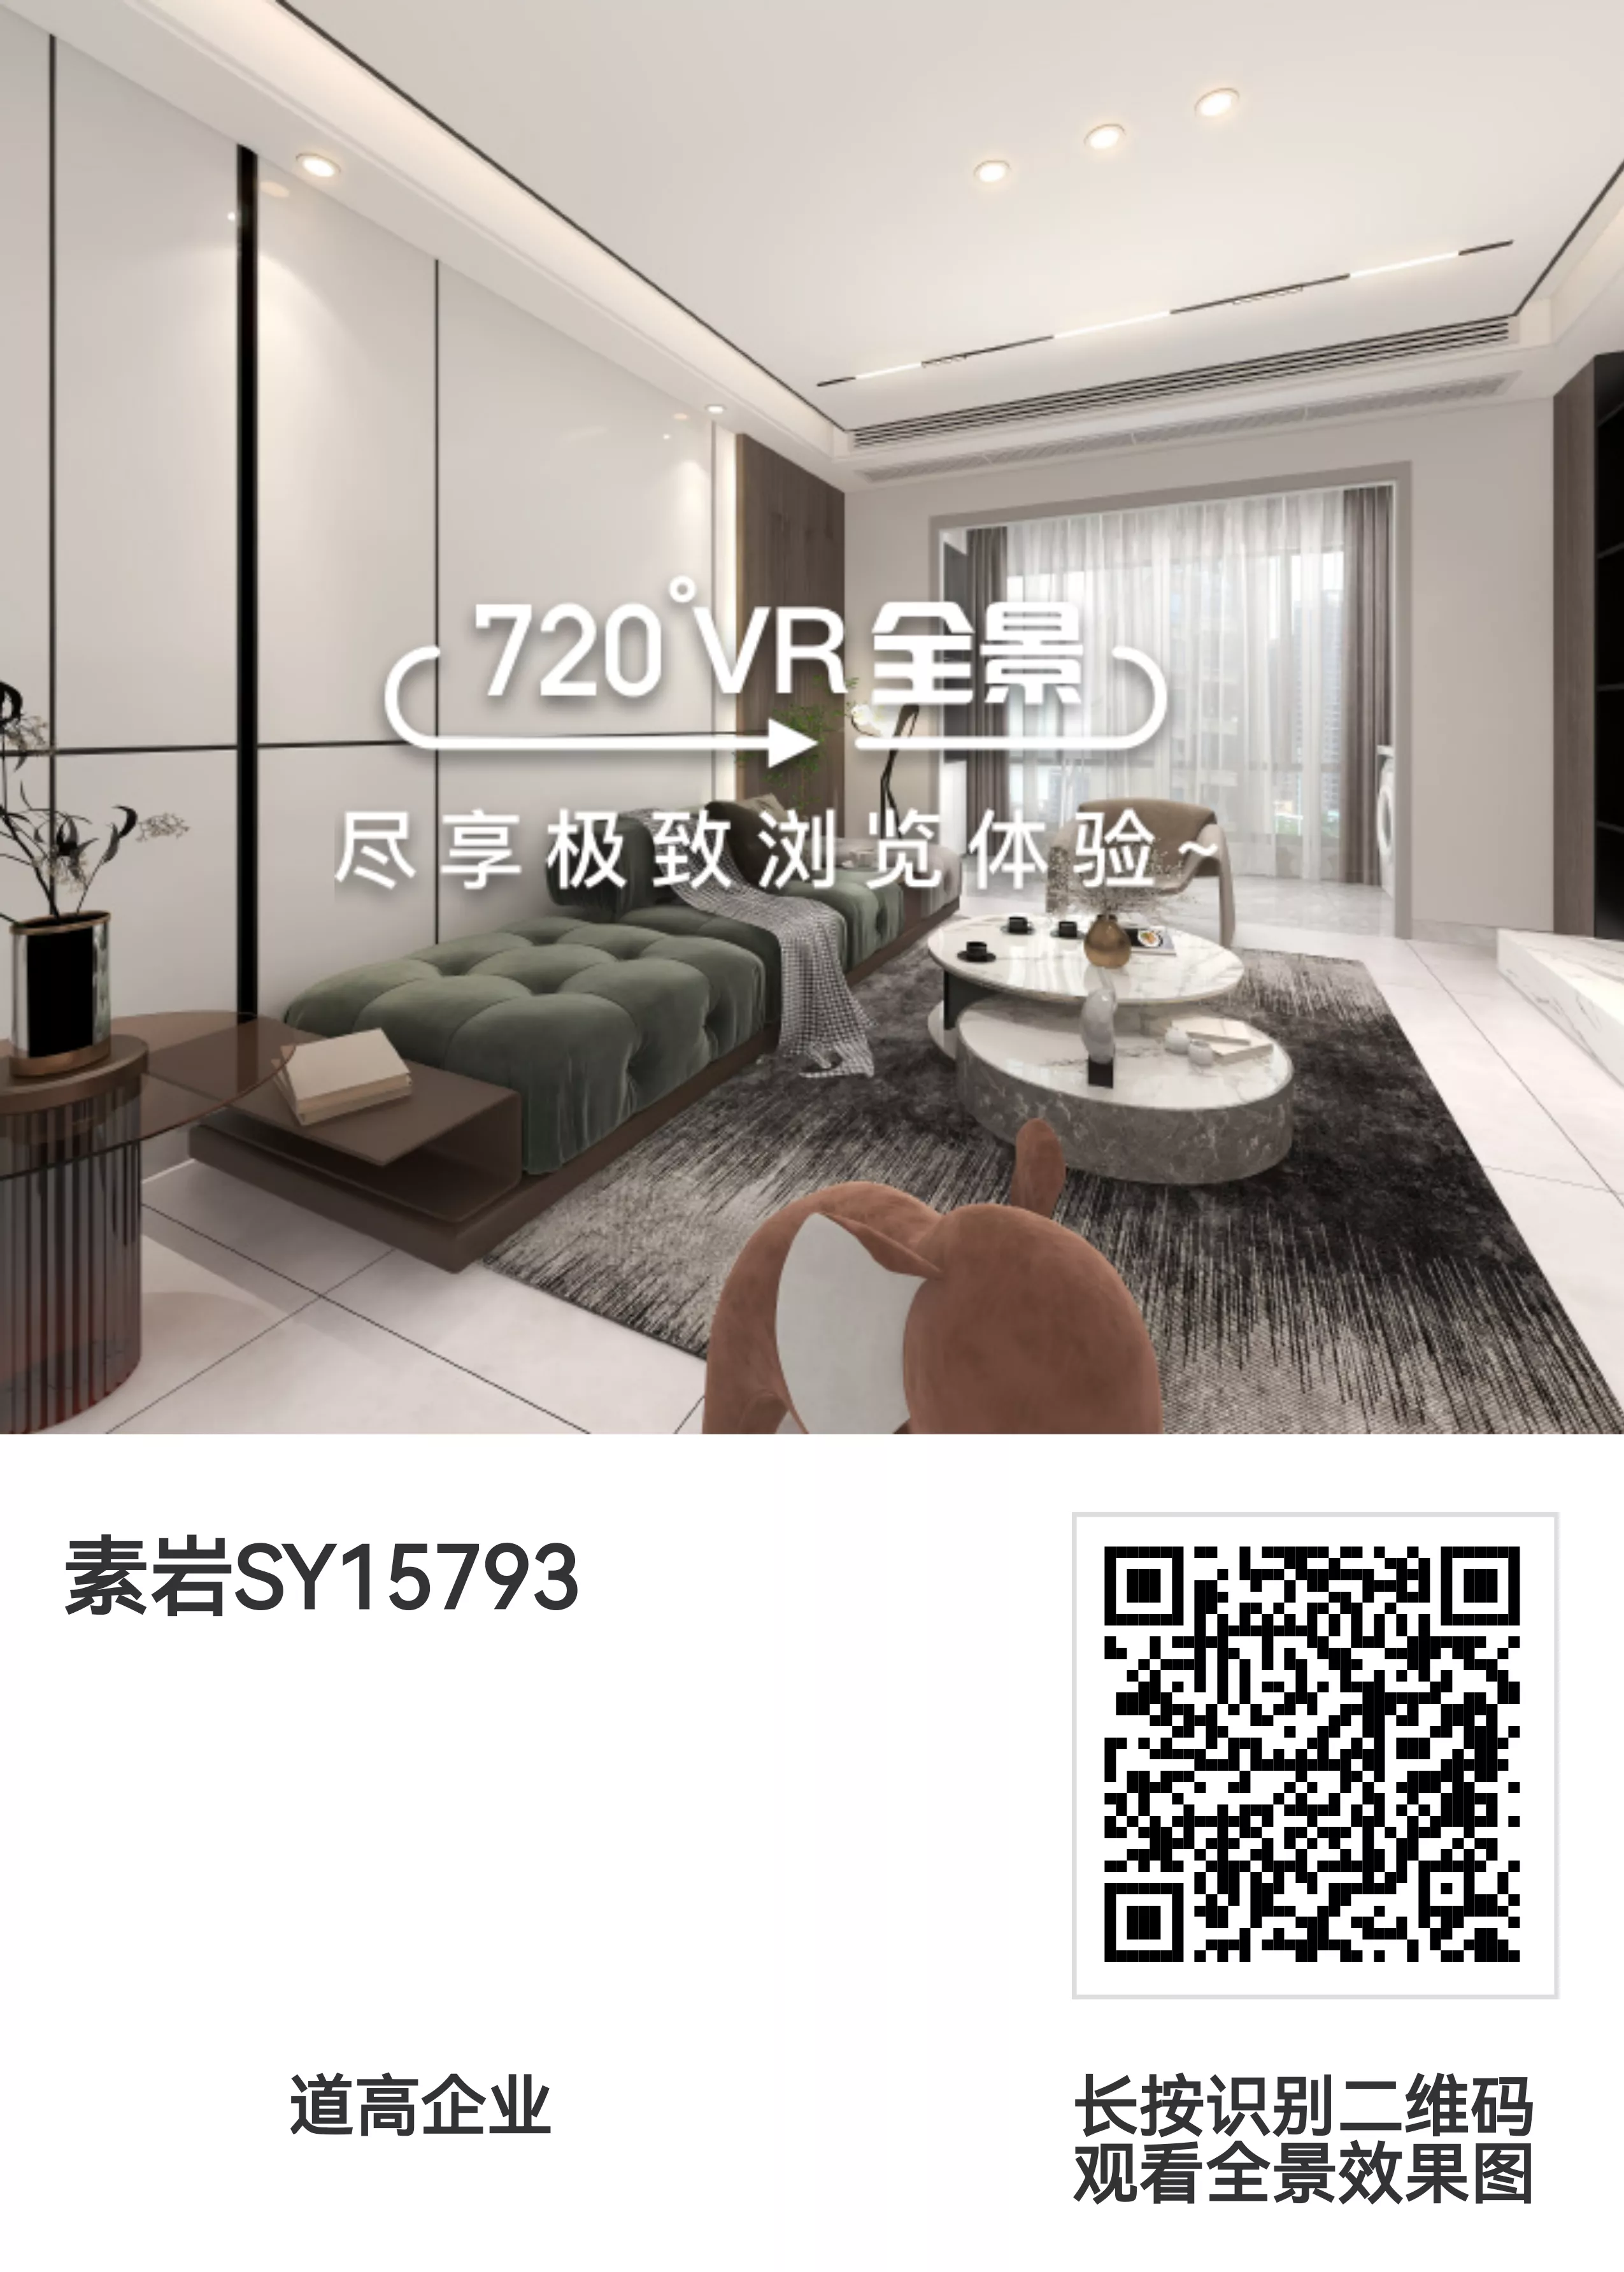 SY15793全景.png